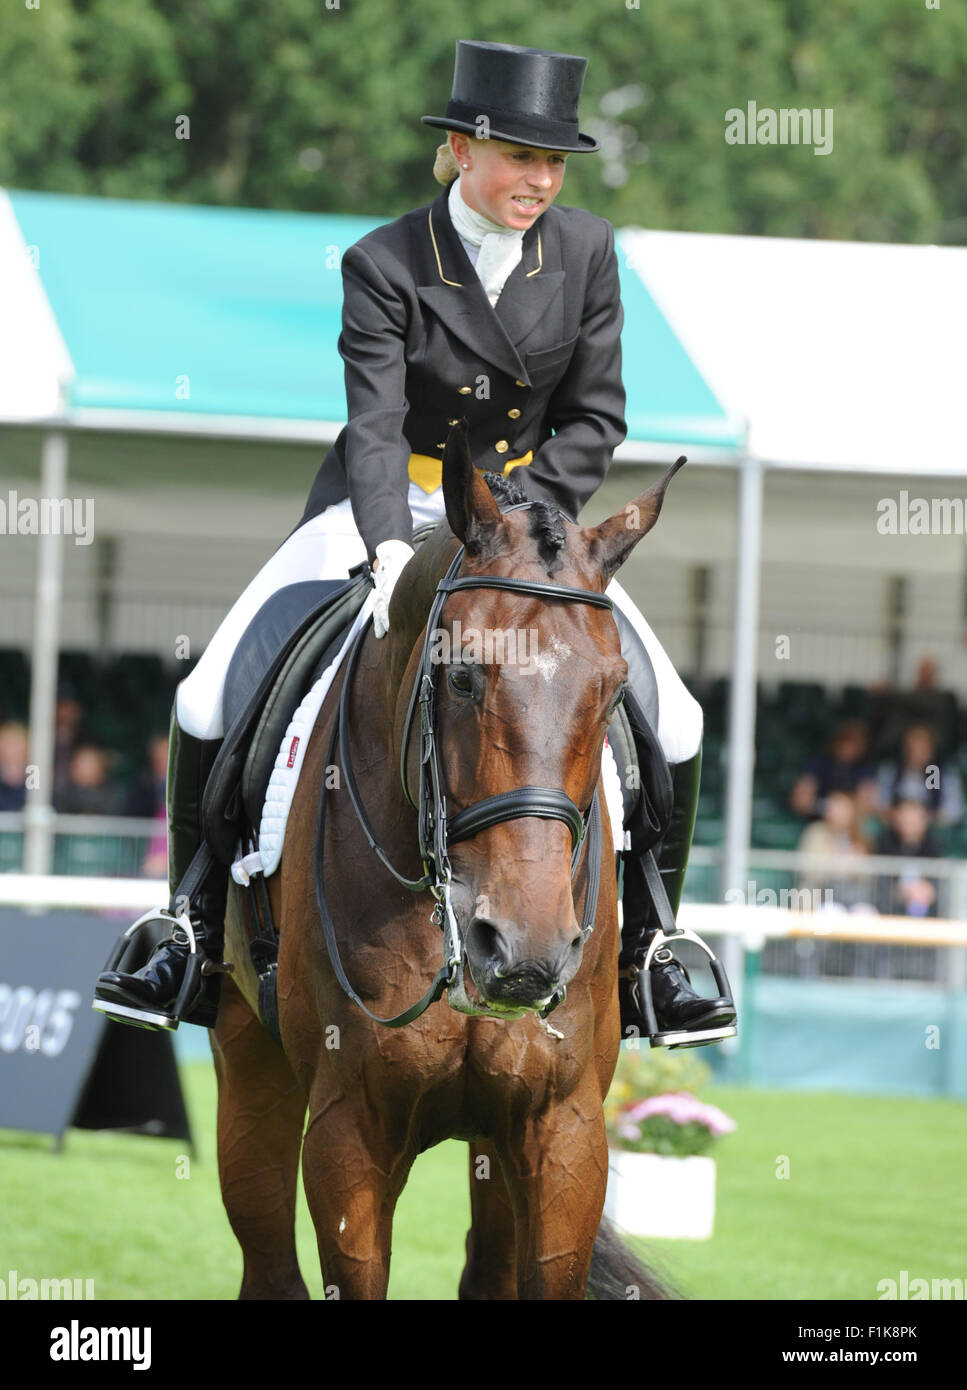 Stamford, UK. 3rd September, 2015. Land Rover Burghley Horse Trials 2015, Stamford England. Rosalind Canter (GBR) riding Allstar B  during the dressage phase (day 1 of 2) Credit:  Julie Priestley/Alamy Live News Stock Photo